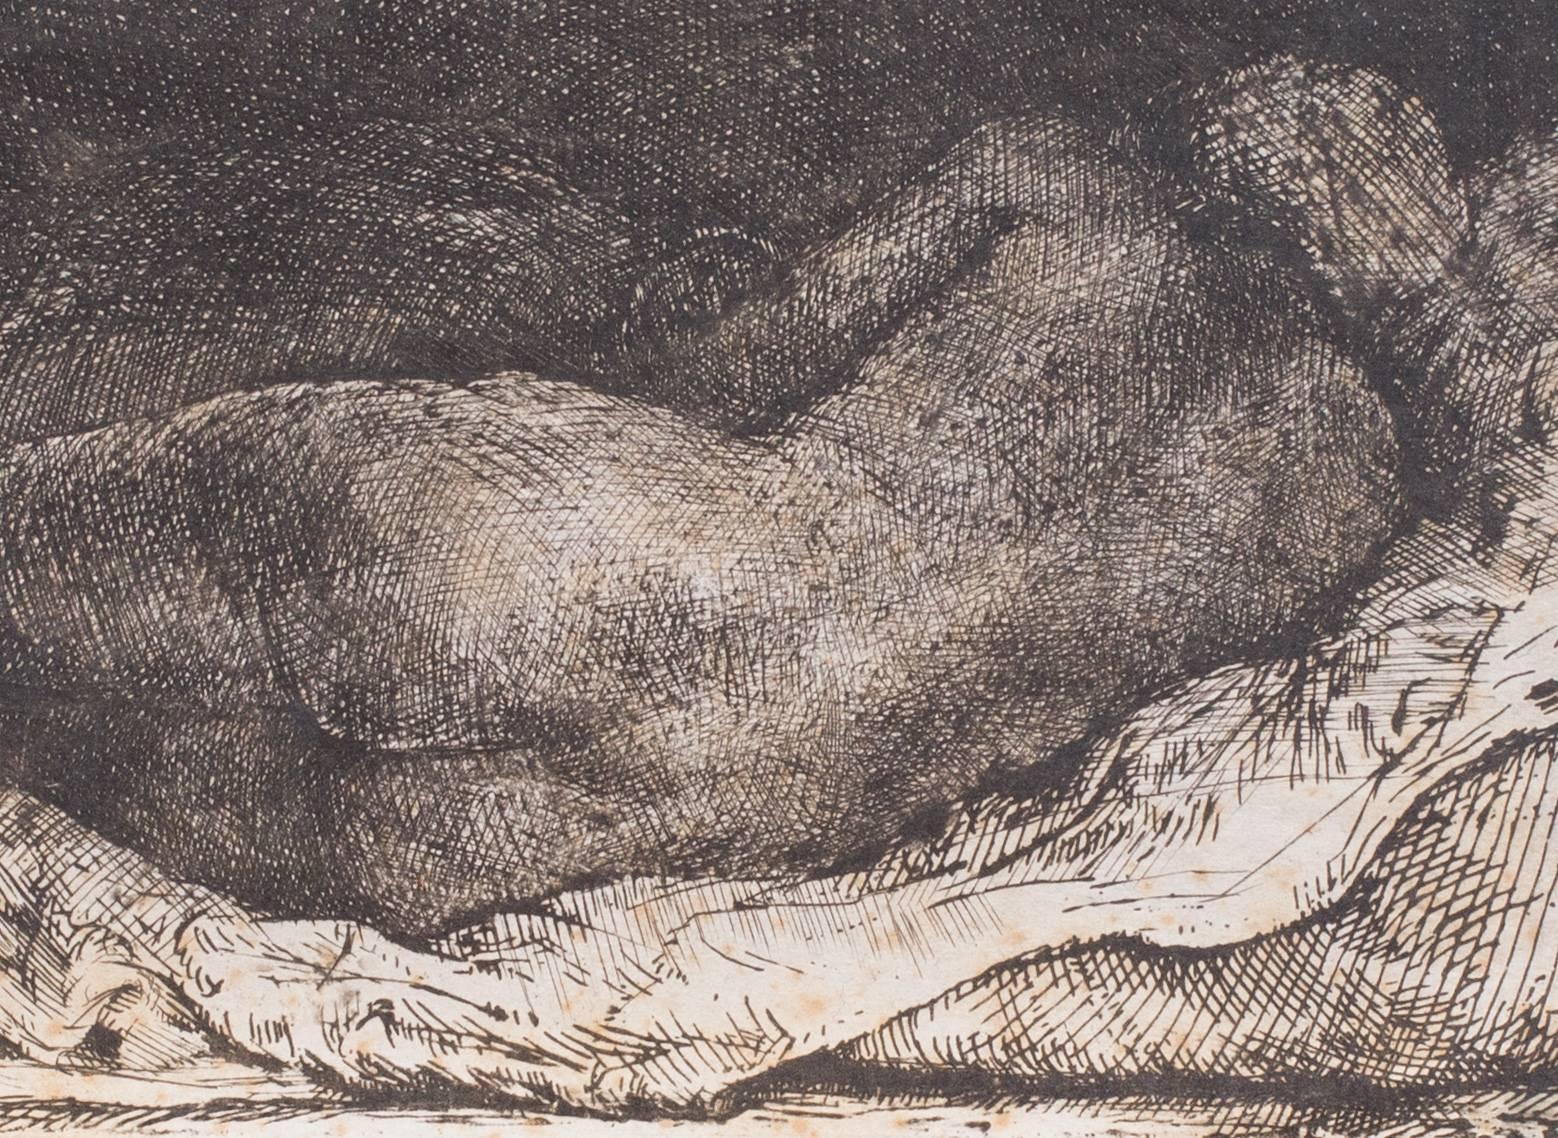 Rembrandt Harmensz, van Rijn
Negress reclining
Signed within the plate 'Rembrandt' (lower left)
Etching
3.3/8 x 6.3/8in. (8.5 x 16.3cm.)

A very fine impression on thin exotic paper, trimmed to the platemark, the printing rich and velvety, of the